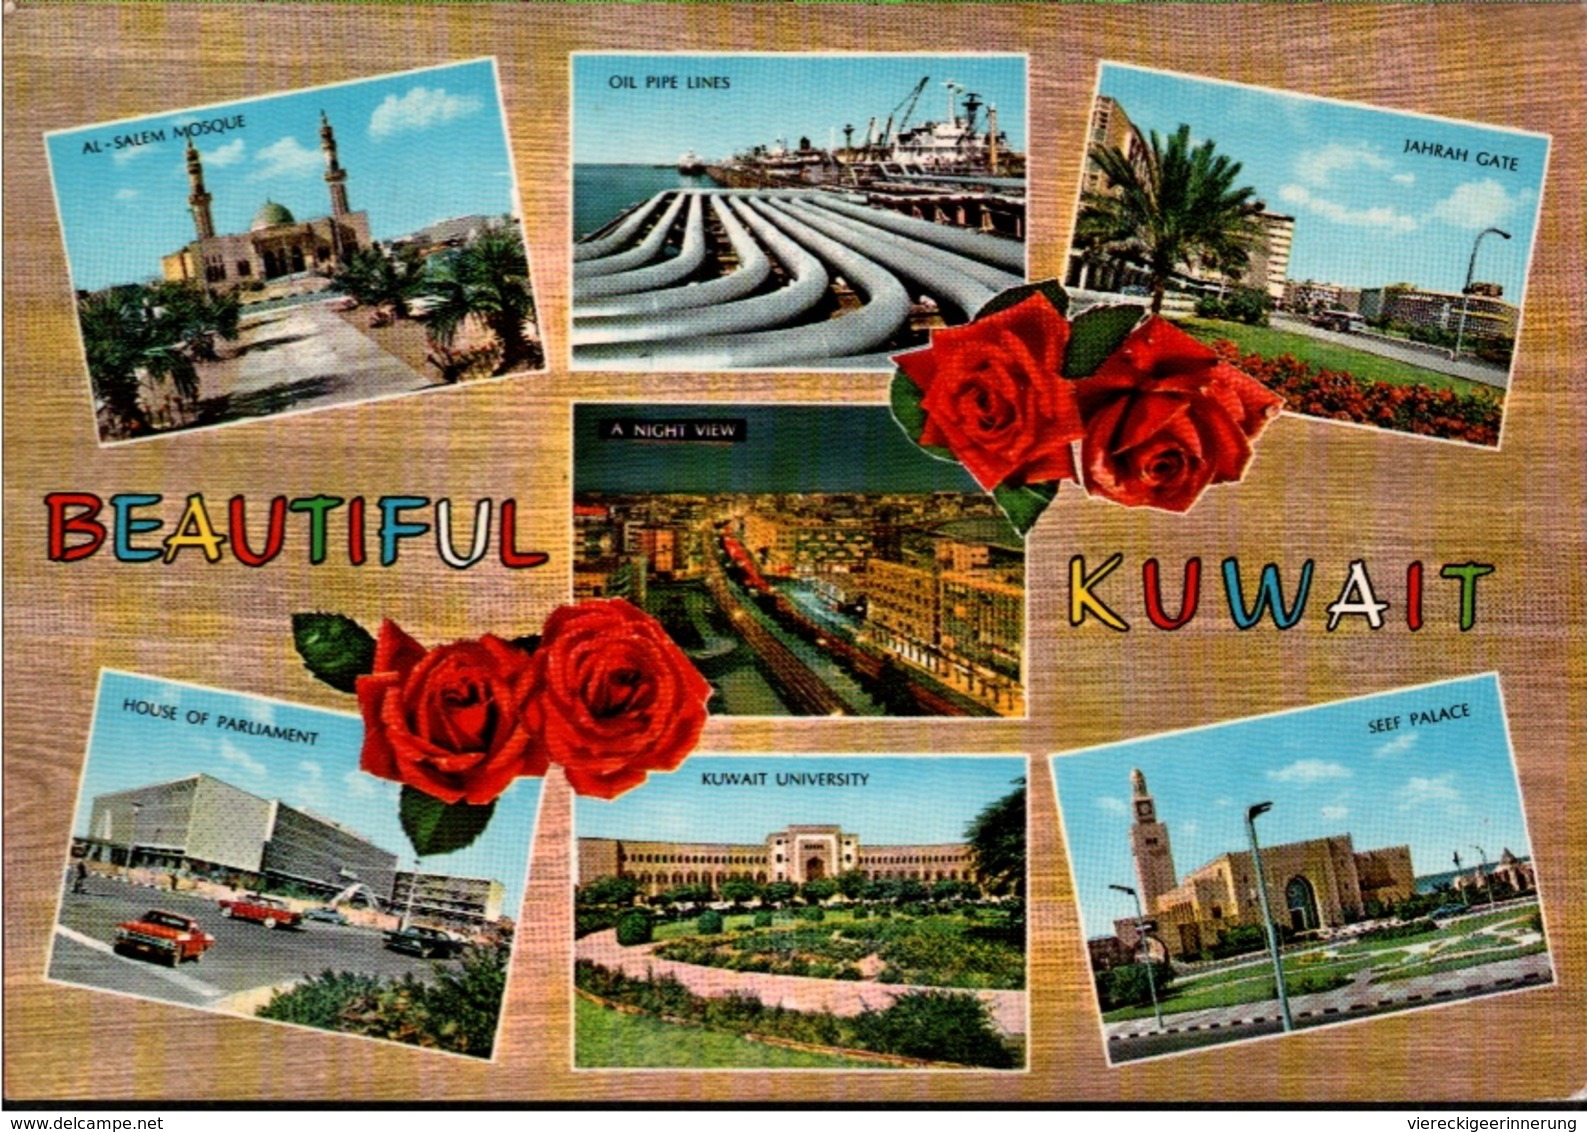 ! Lot of 17 postcards from Kuwait,  unused, same editor